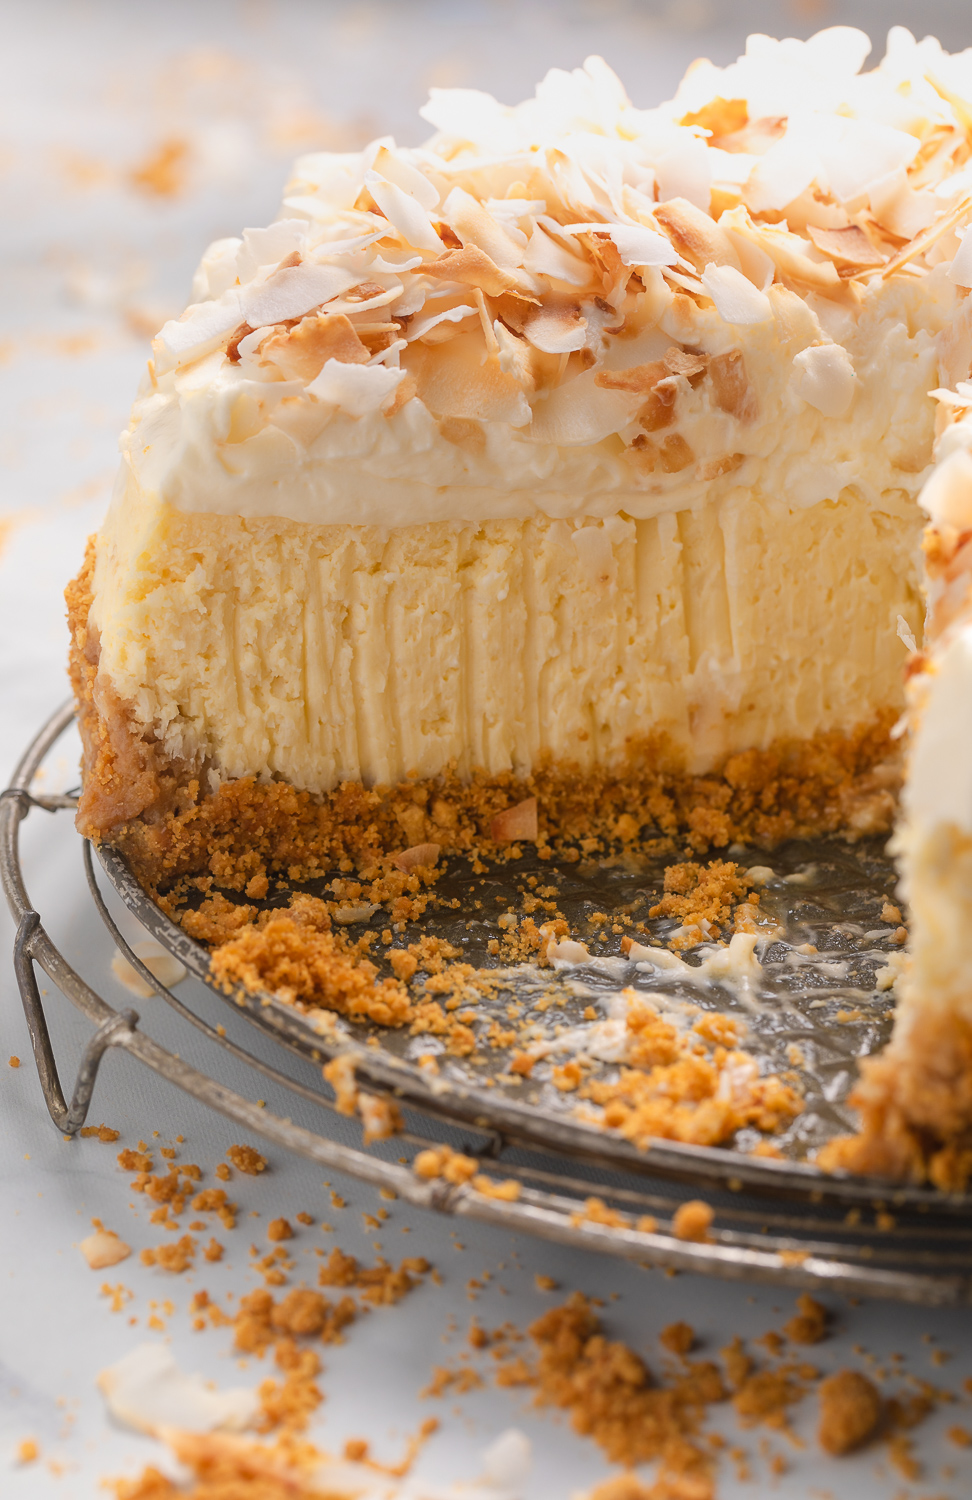 This Creamy Coconut Cheesecake is made with coconut milk, coconut extract, and shredded coconut, so you know it's loaded with refreshing coconut flavor! The crunchy graham cracker crust is the perfect contrast to the creamy filling and fluffy whipped cream topping. A must try for coconut lovers!